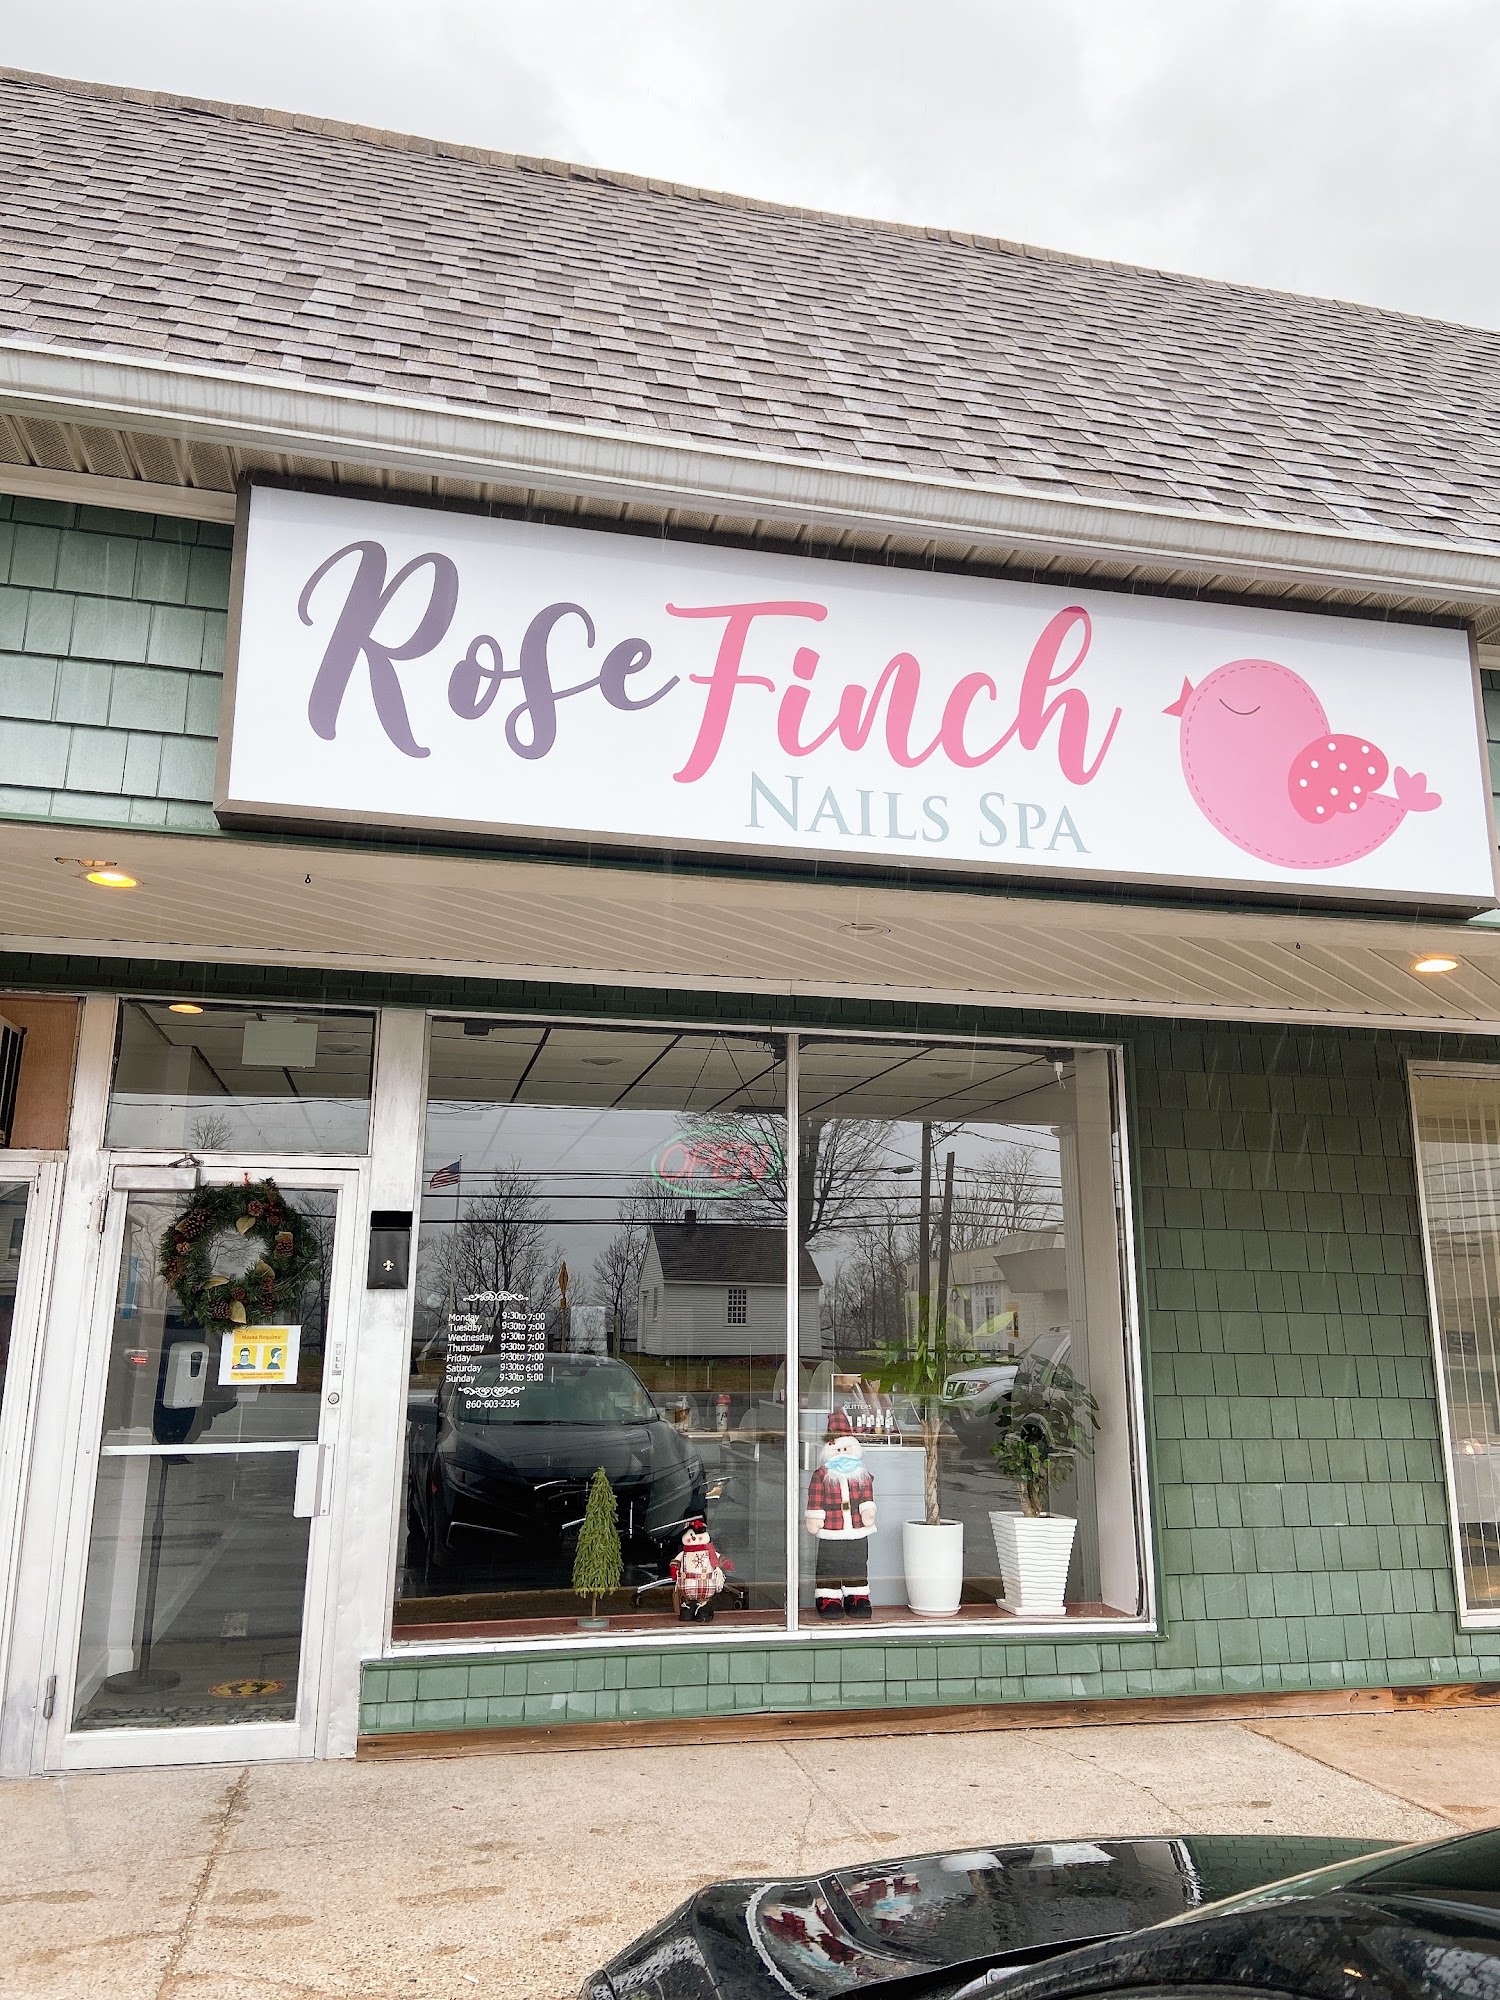 Rose finch nail spa 103 S Main St, Colchester Connecticut 06415